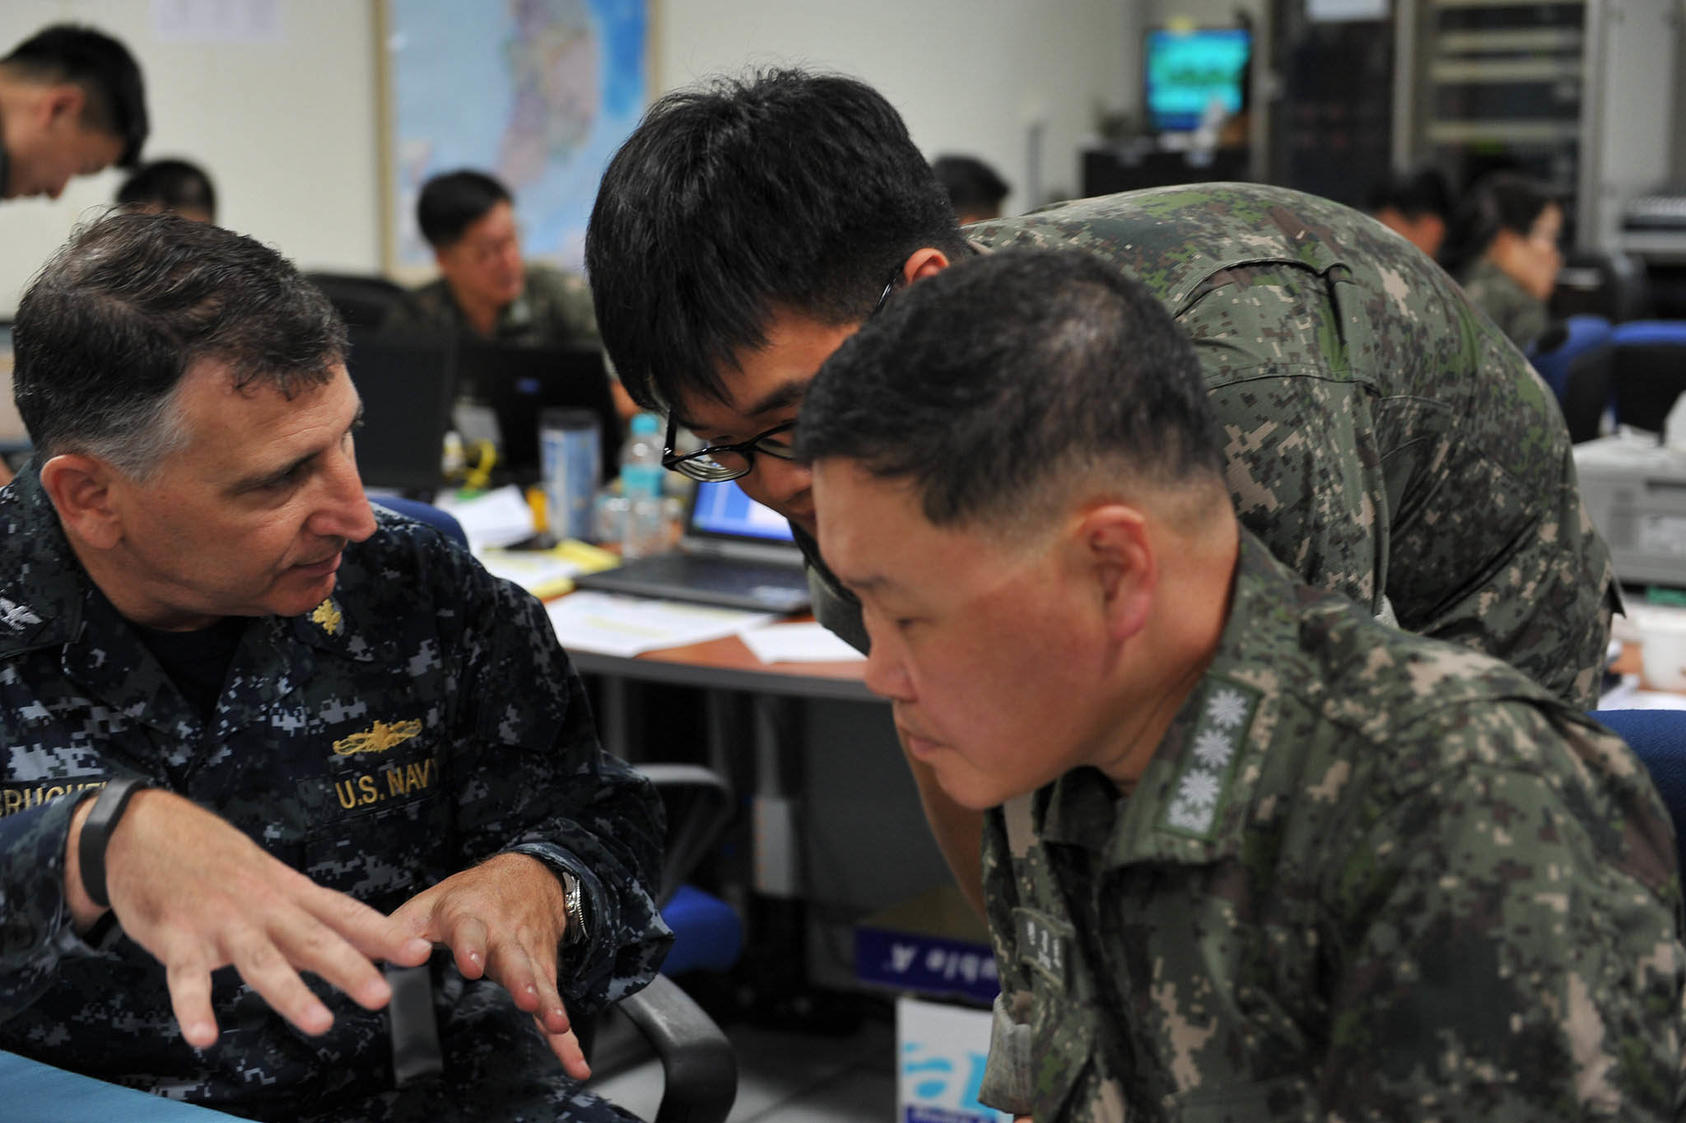 U.S. and South Korean naval officers coordinate logistical operations in 2014 during an annual exercise, Ulchi Freedom Guardian (which is named for a seventh-century Korean general). On June 18, the United States and South Korea announced the cancellation of the 2018 exercise. (U.S. Pacific Fleet)